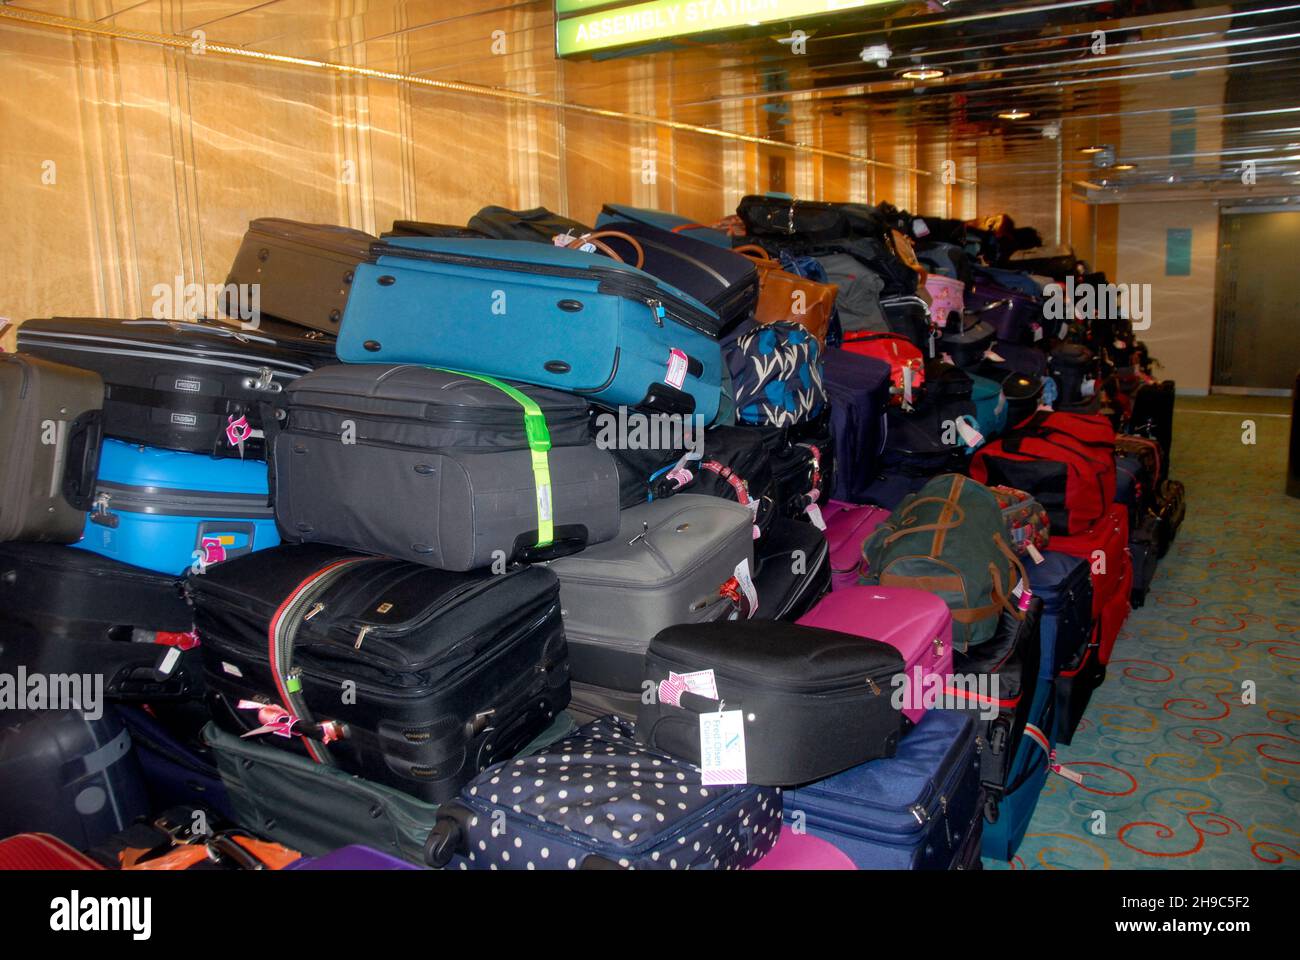 Luggage collected by porters from passengers on a cruise ship and placed in a temporary holding area before disembarking Stock Photo